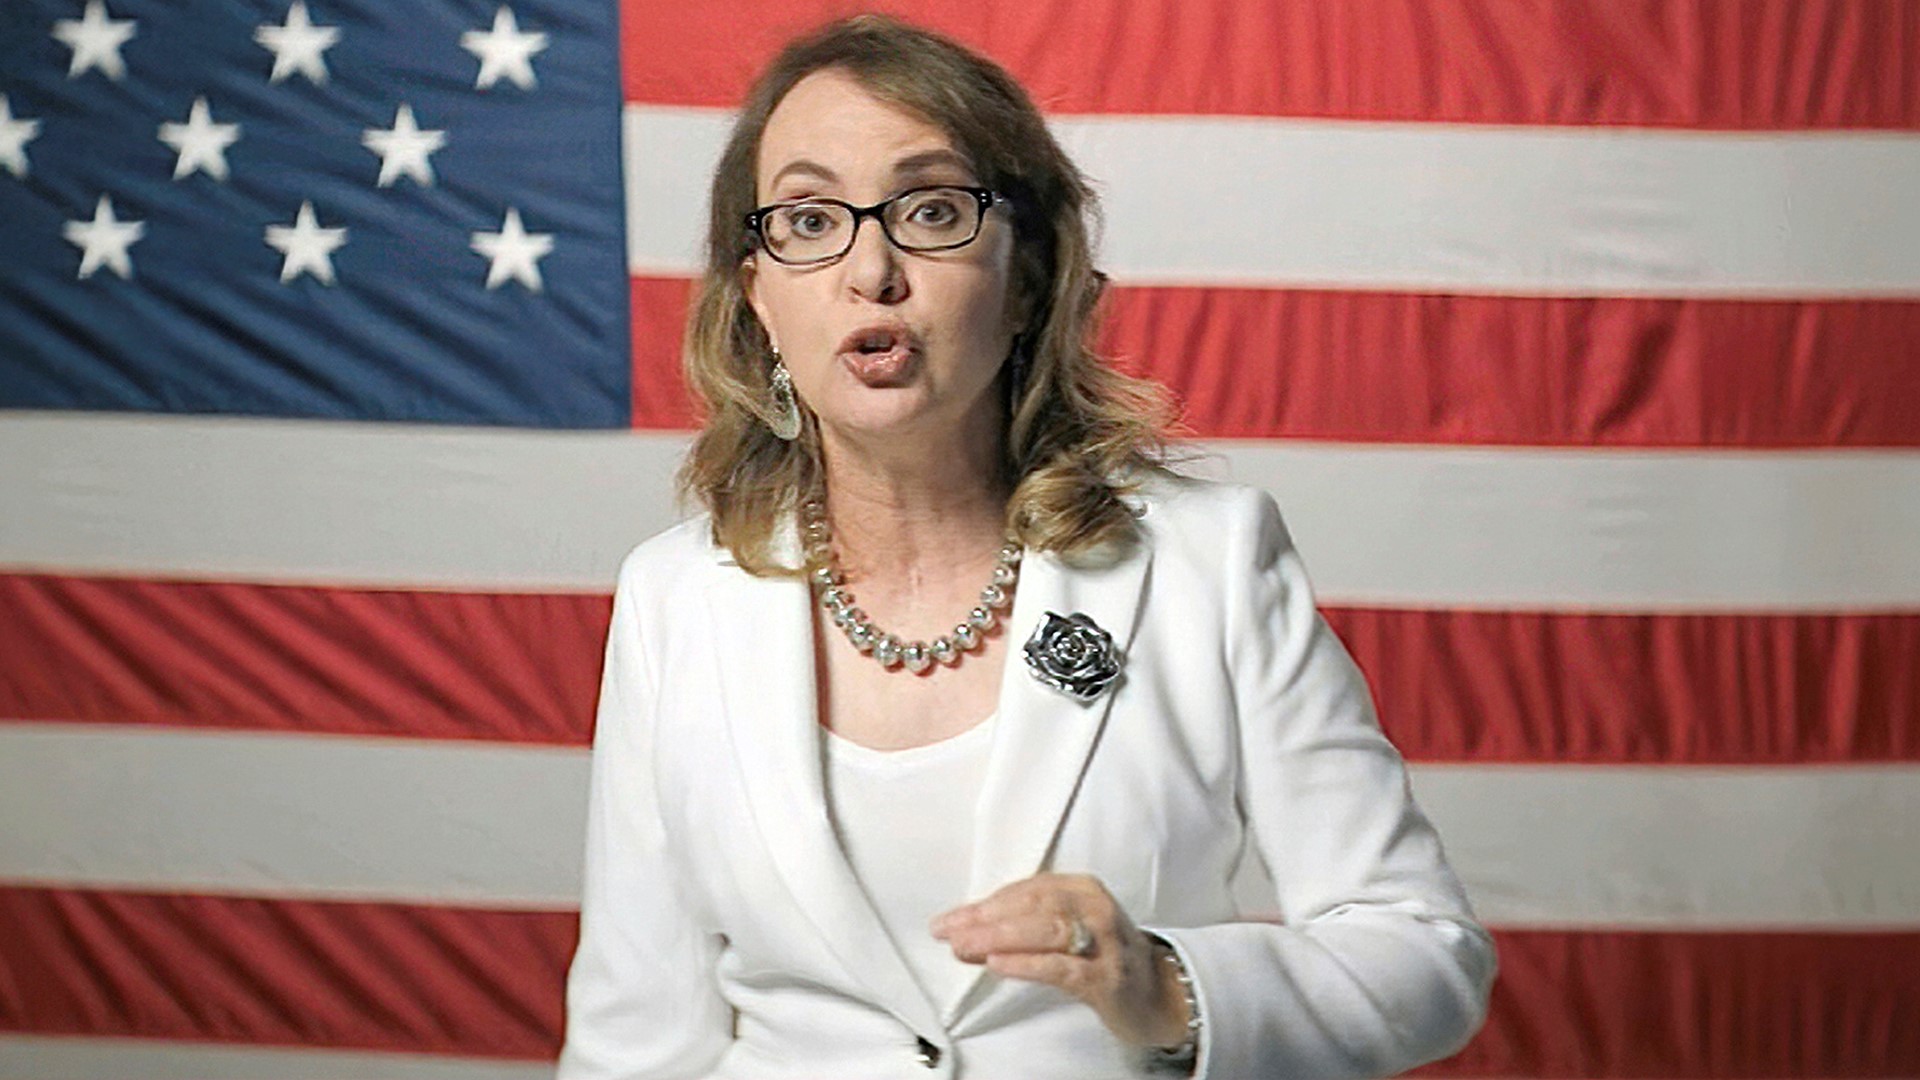 Former Rep. Gabrielle Giffords, a shooting survivor, speaks about gun violence and urges Americans to vote for Joe Biden at the Democratic National Convention.